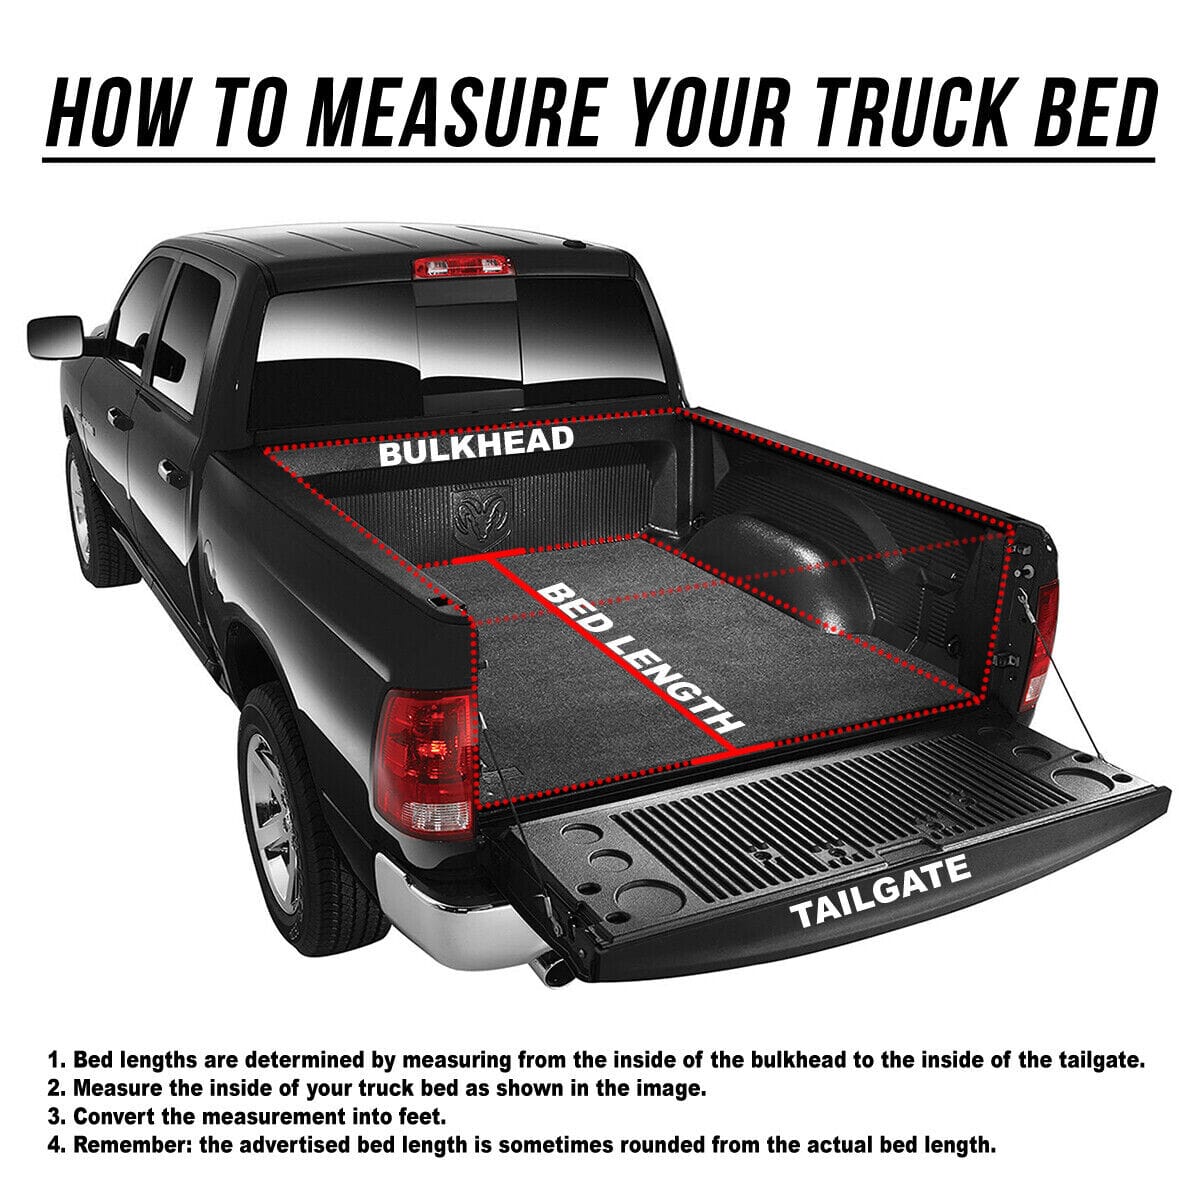 6.5'Bed Tri-Fold Adjustable Soft Trunk Tonneau Cover For 04-14 Ford F150